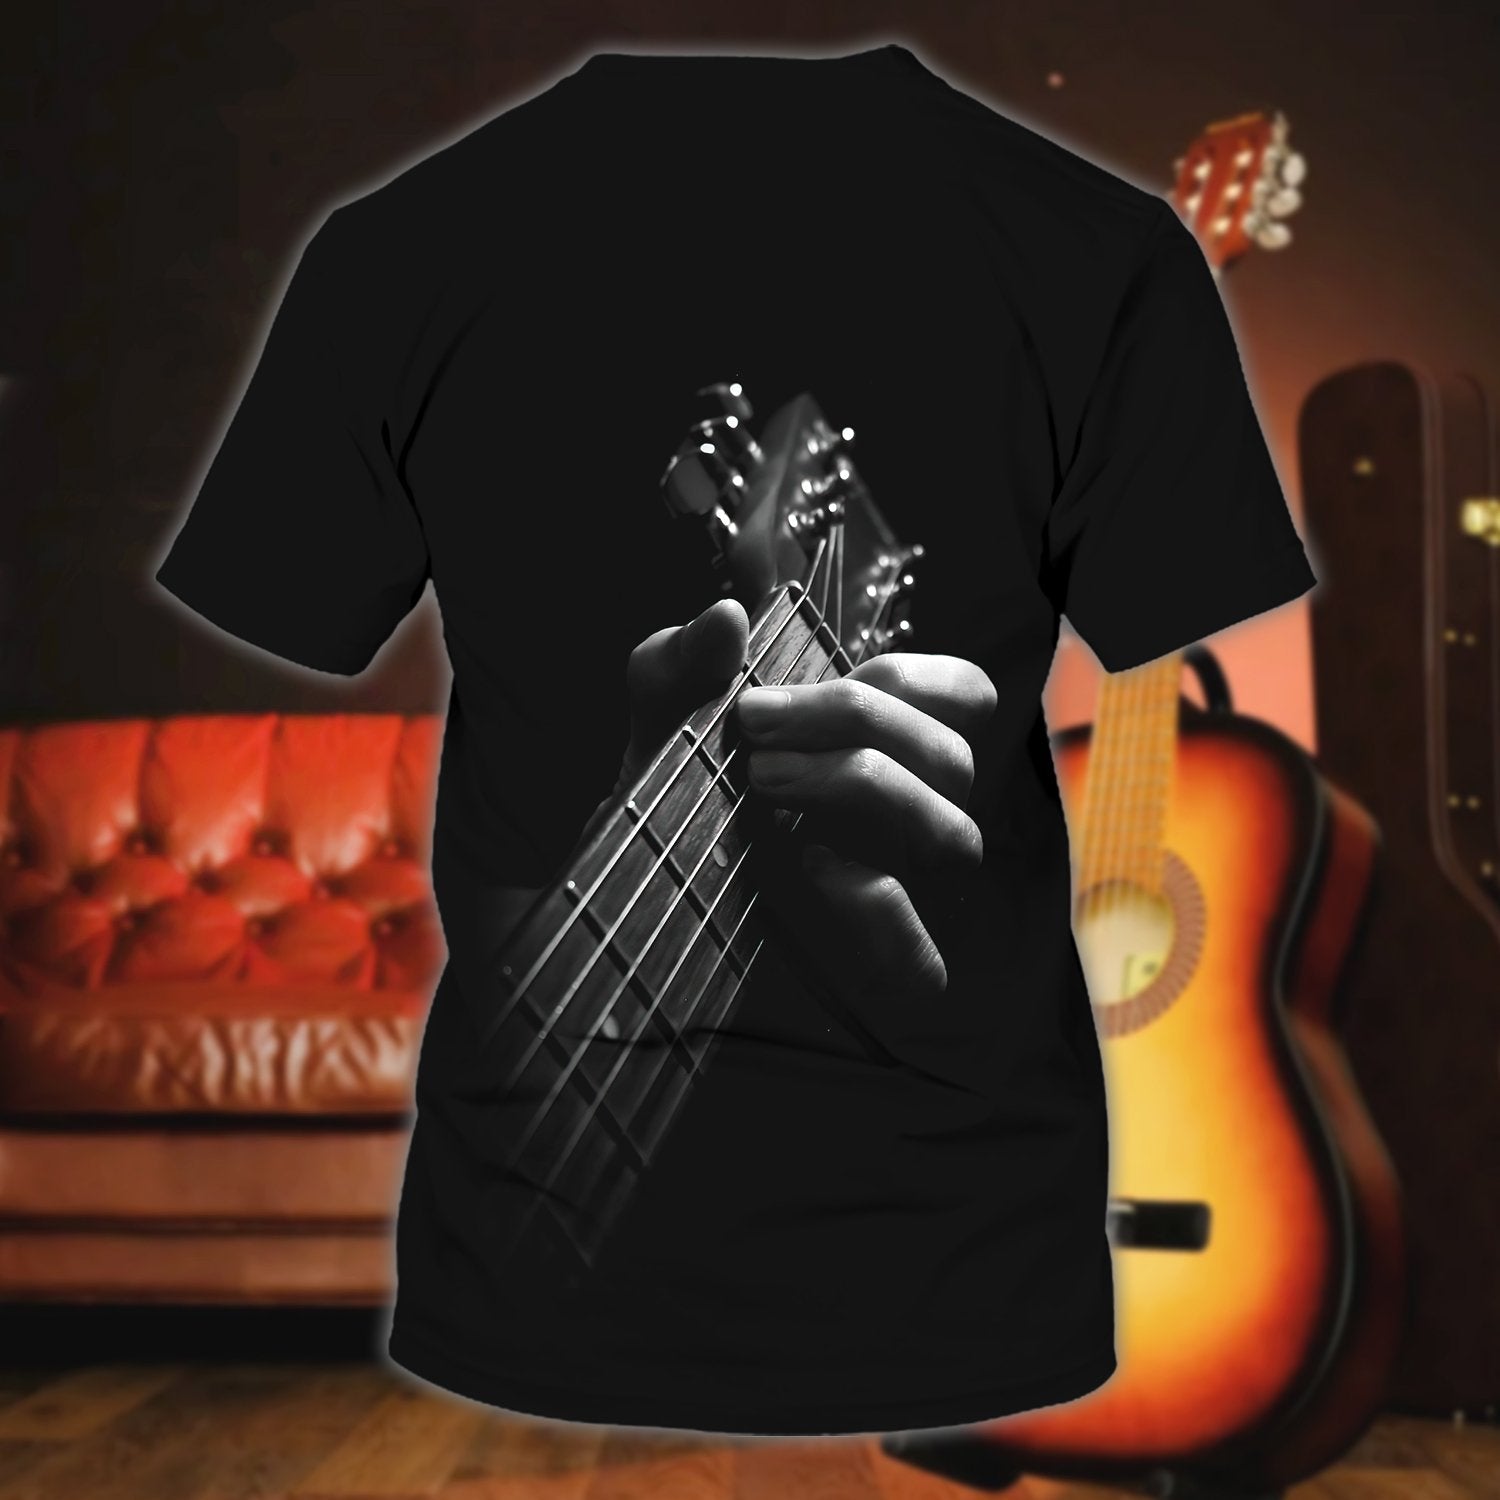 Personalized 3D Playing Guitar Shirt/ Guitar Sublimation Shirt For Music Lovers